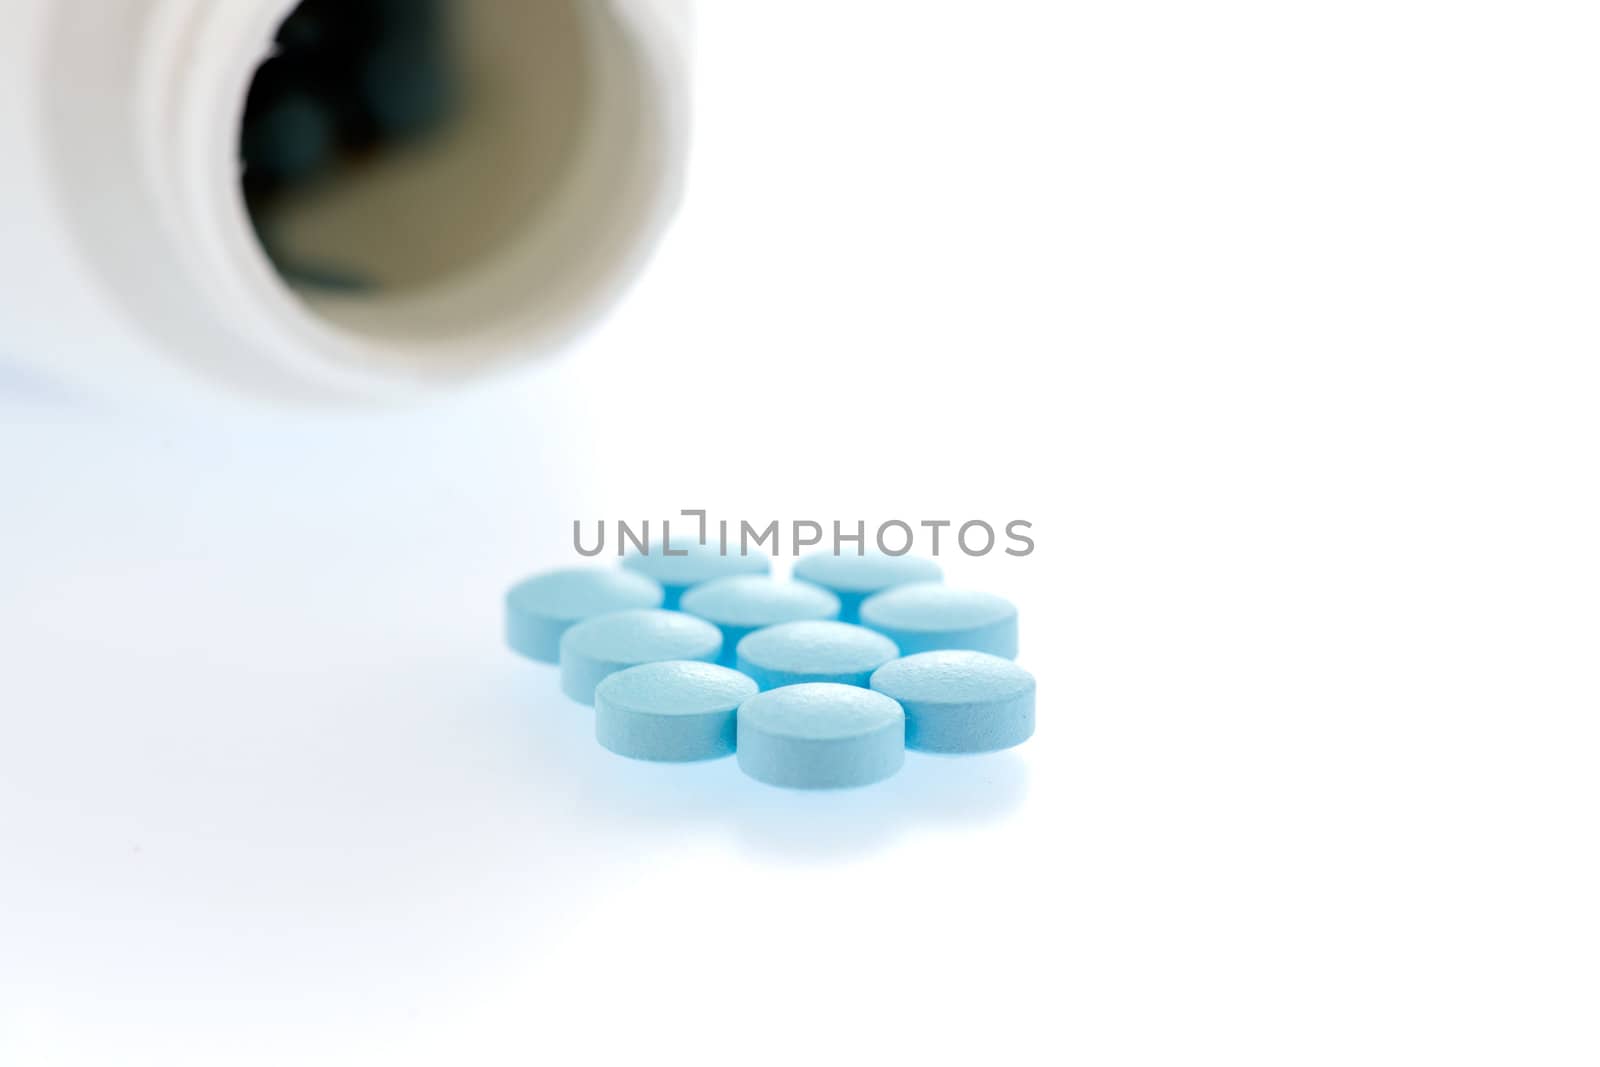 medication spilling from an open bottle by Marcus